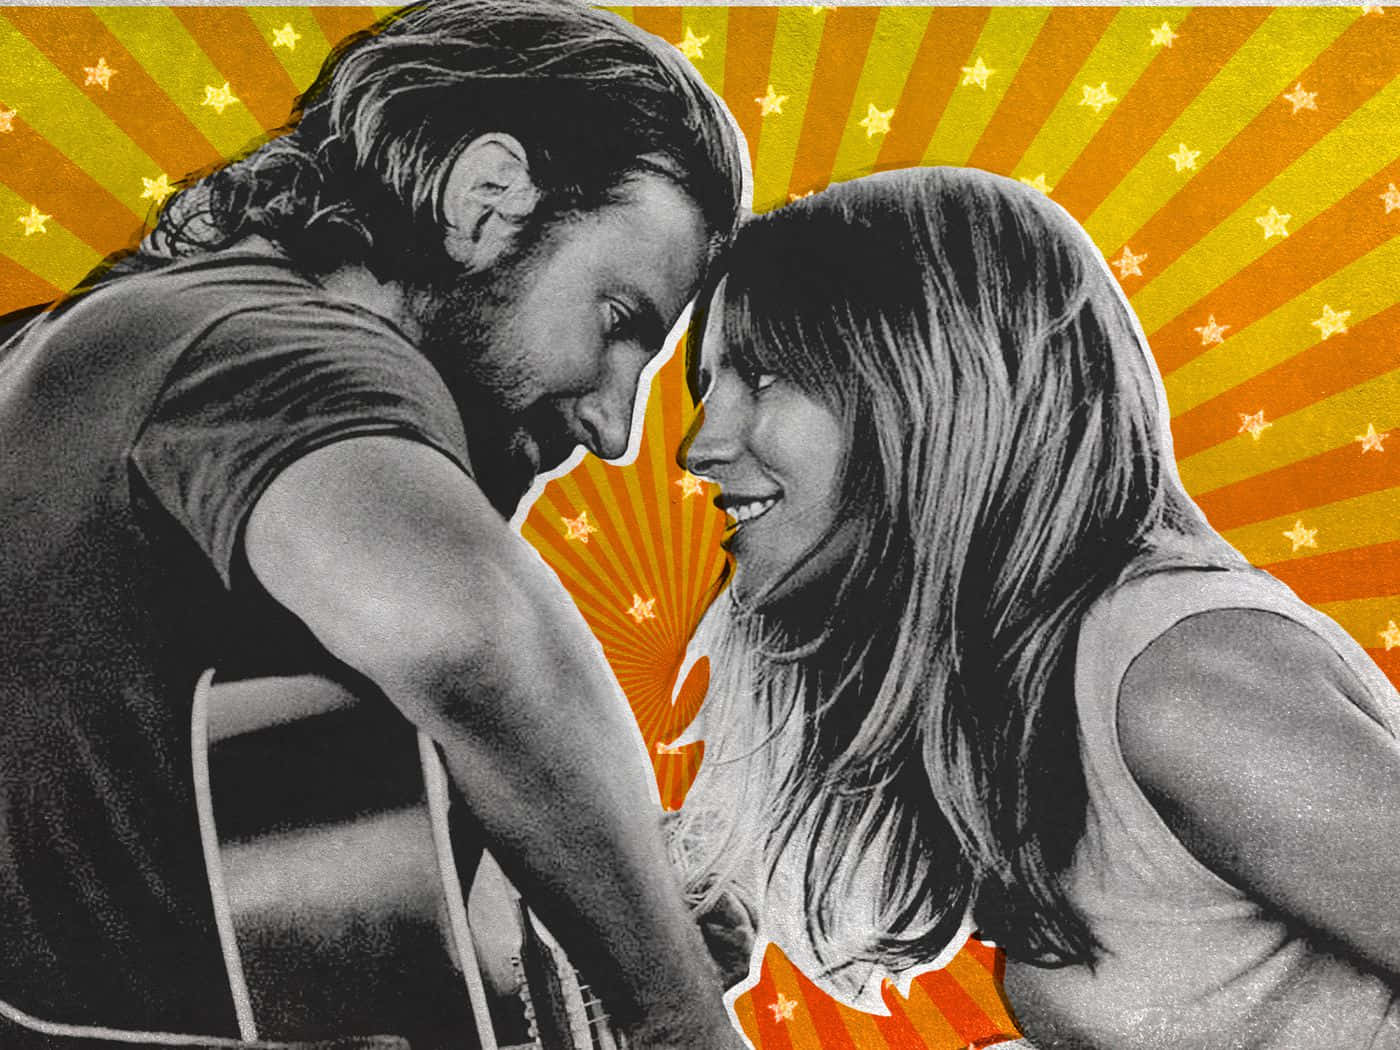 A Star Is Born – Bradley Cooper And Lady Gaga Immersed In A Duet Wallpaper